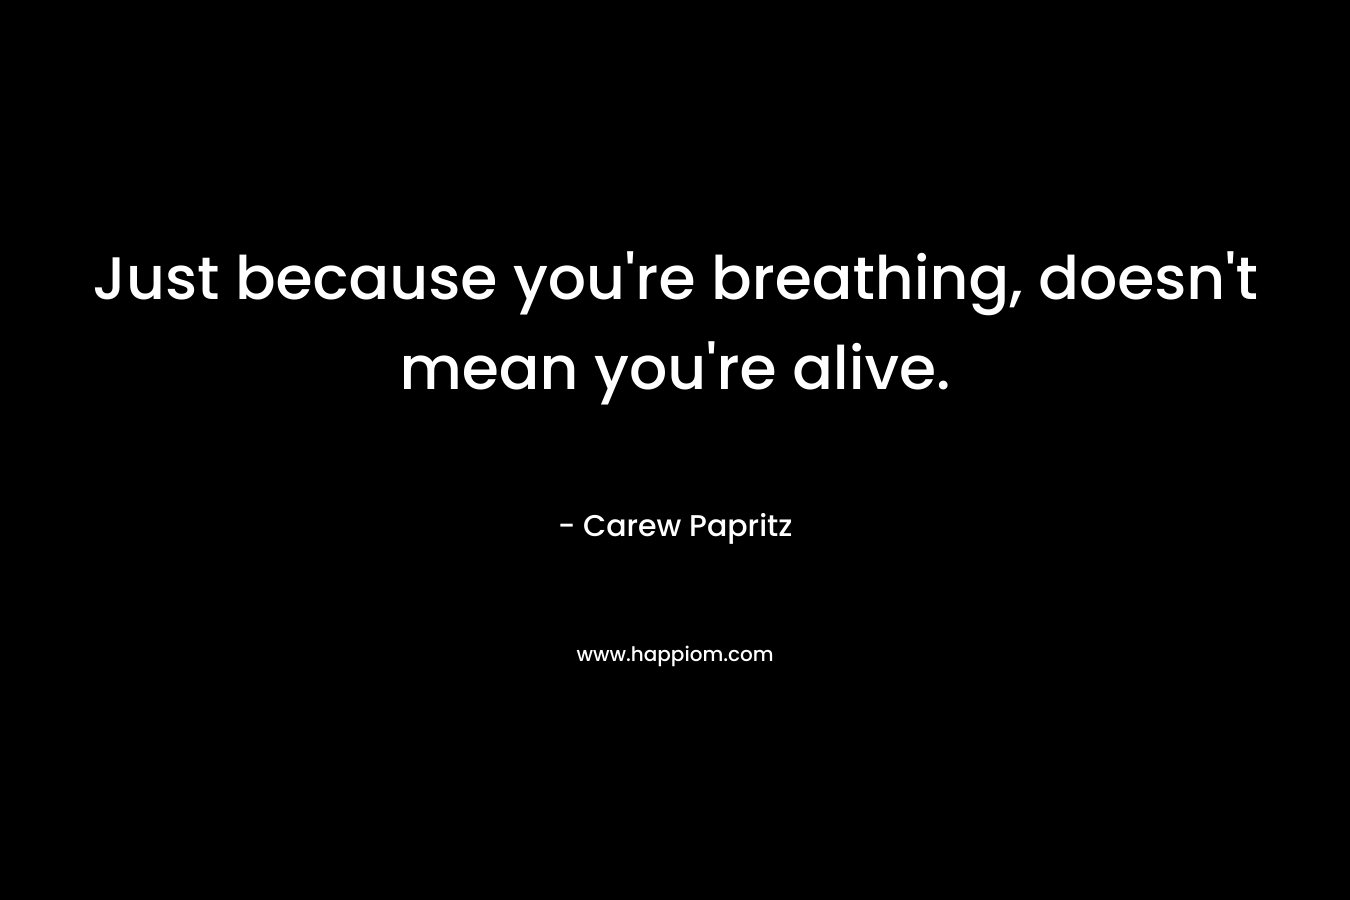 Just because you’re breathing, doesn’t mean you’re alive. – Carew Papritz